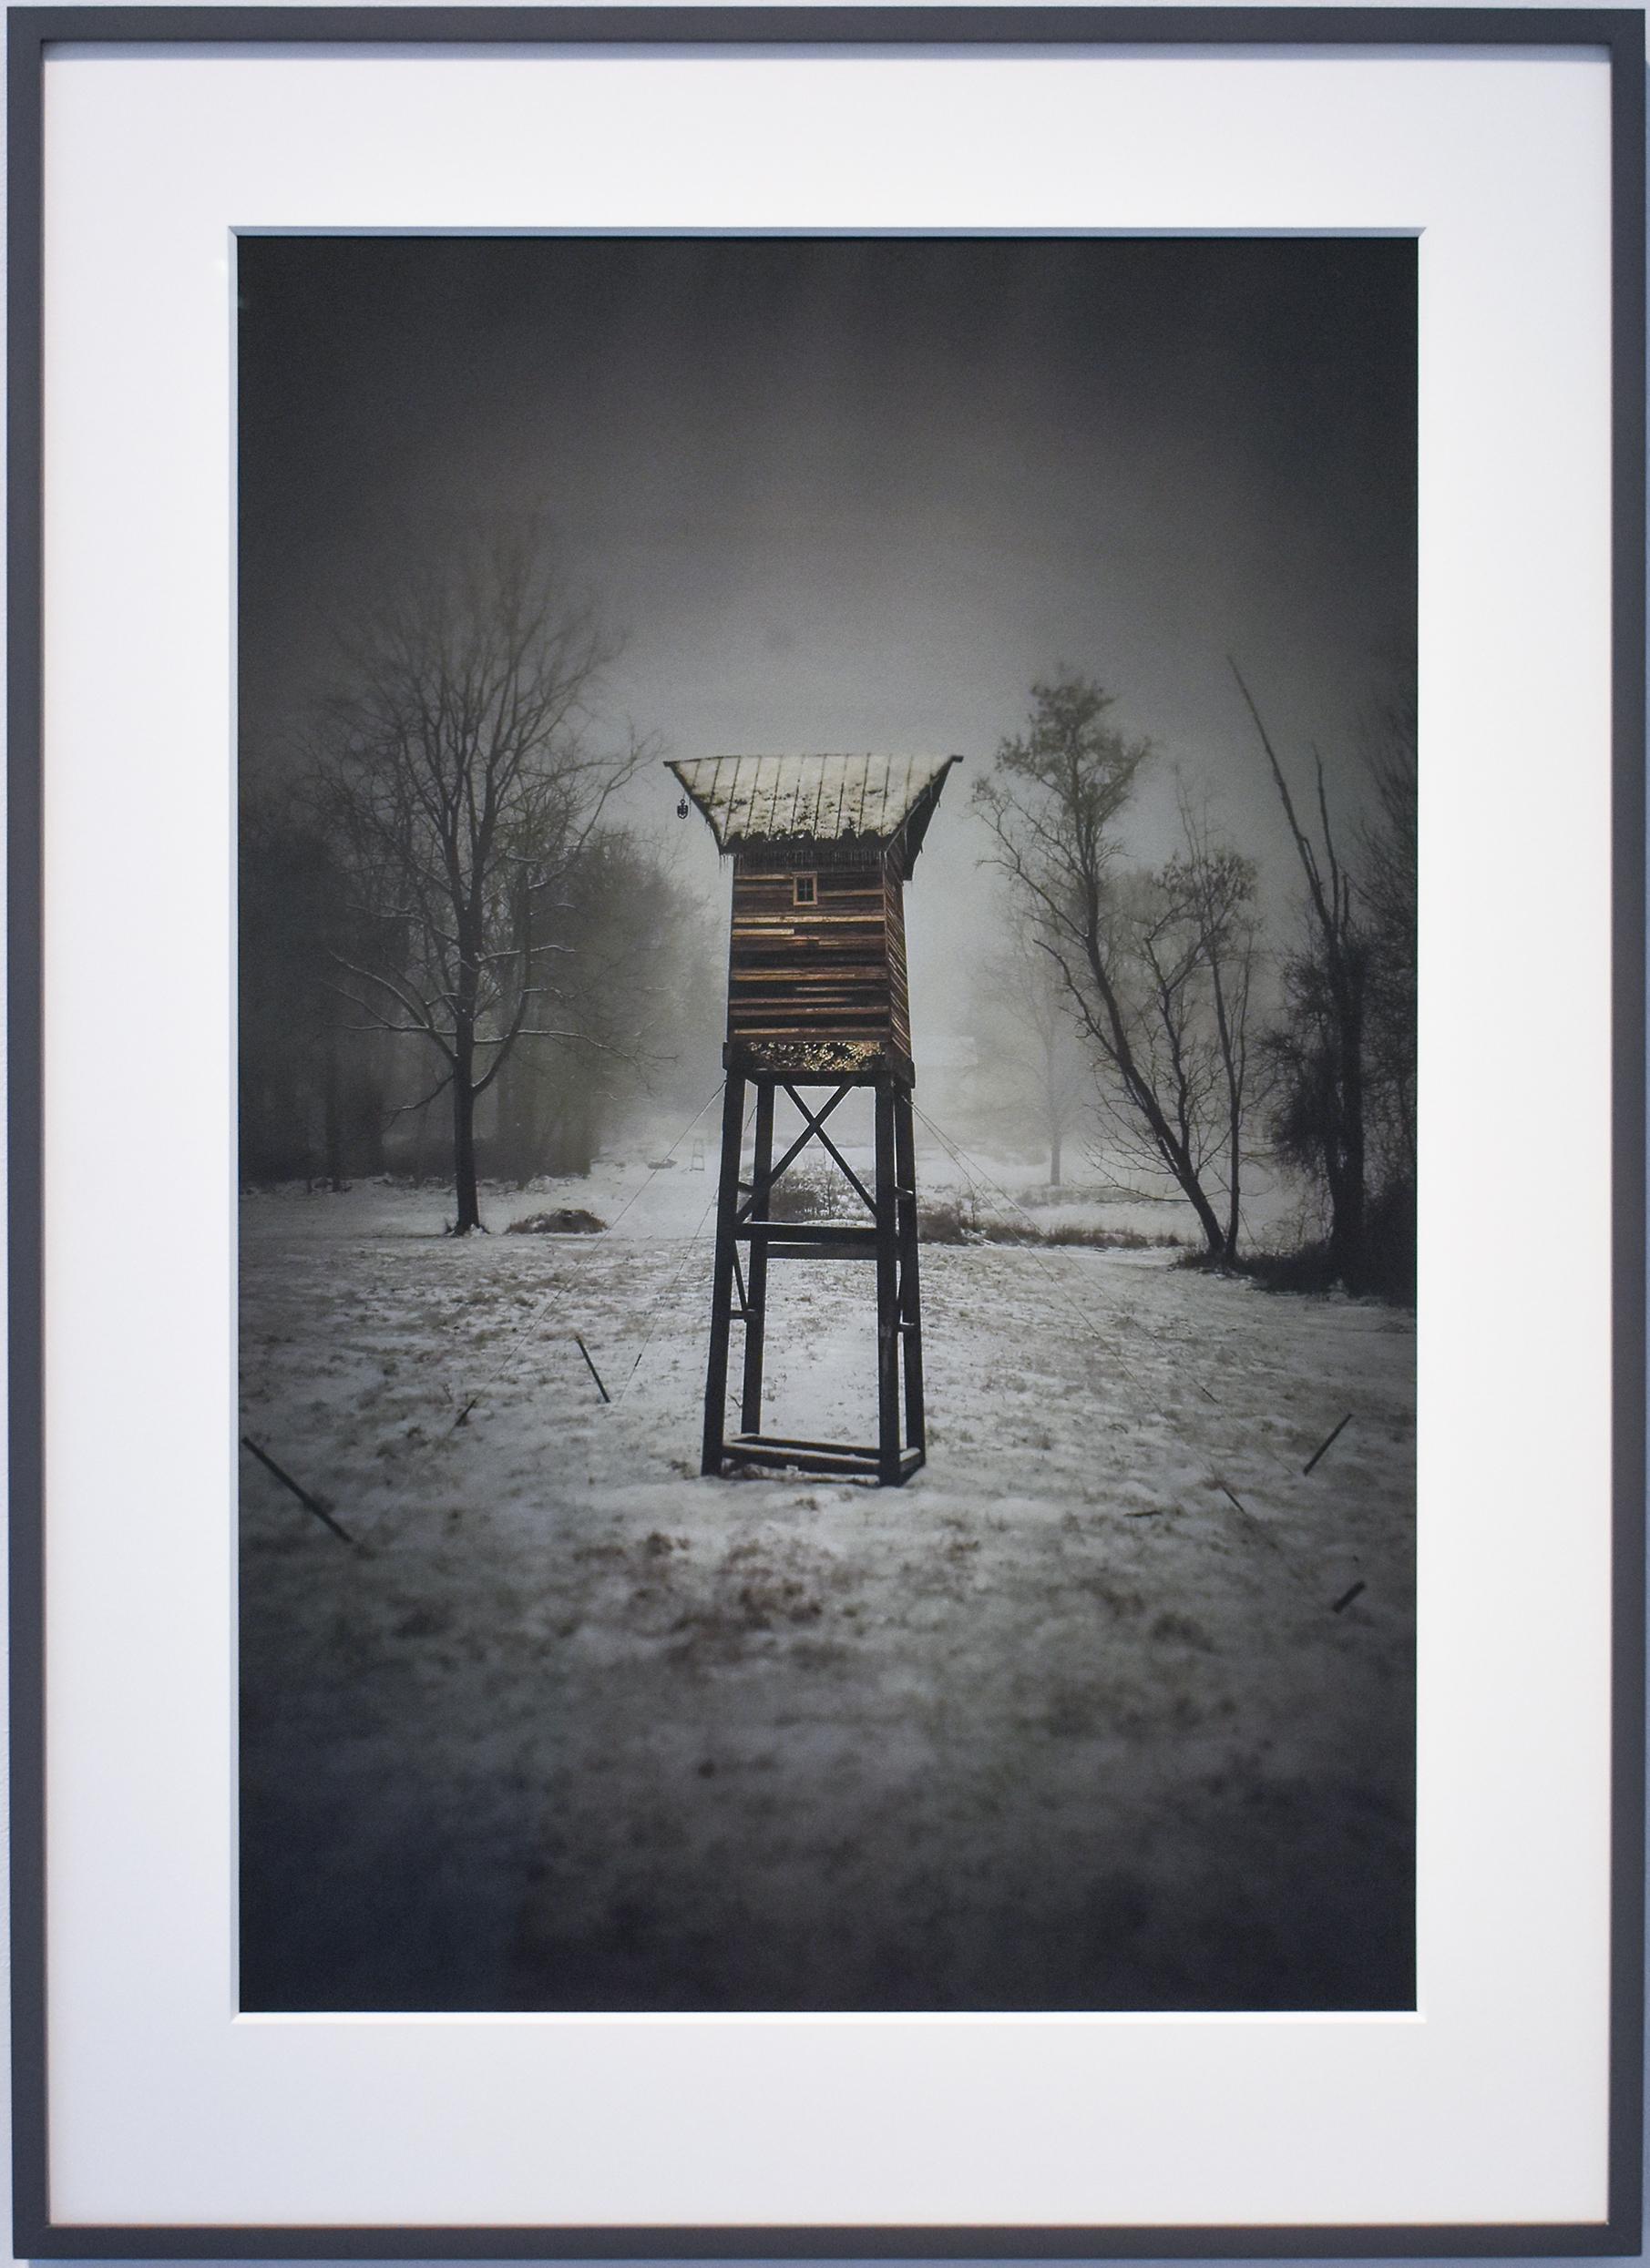 Black and white photograph with subtle color of a brown wooden structure in a winter landscape 
archival pigment print, edition of 10 
27 x 18 inches, 33 x 24 inches in dark grey painted wood frame with 8-ply mat and non-glare glass

This